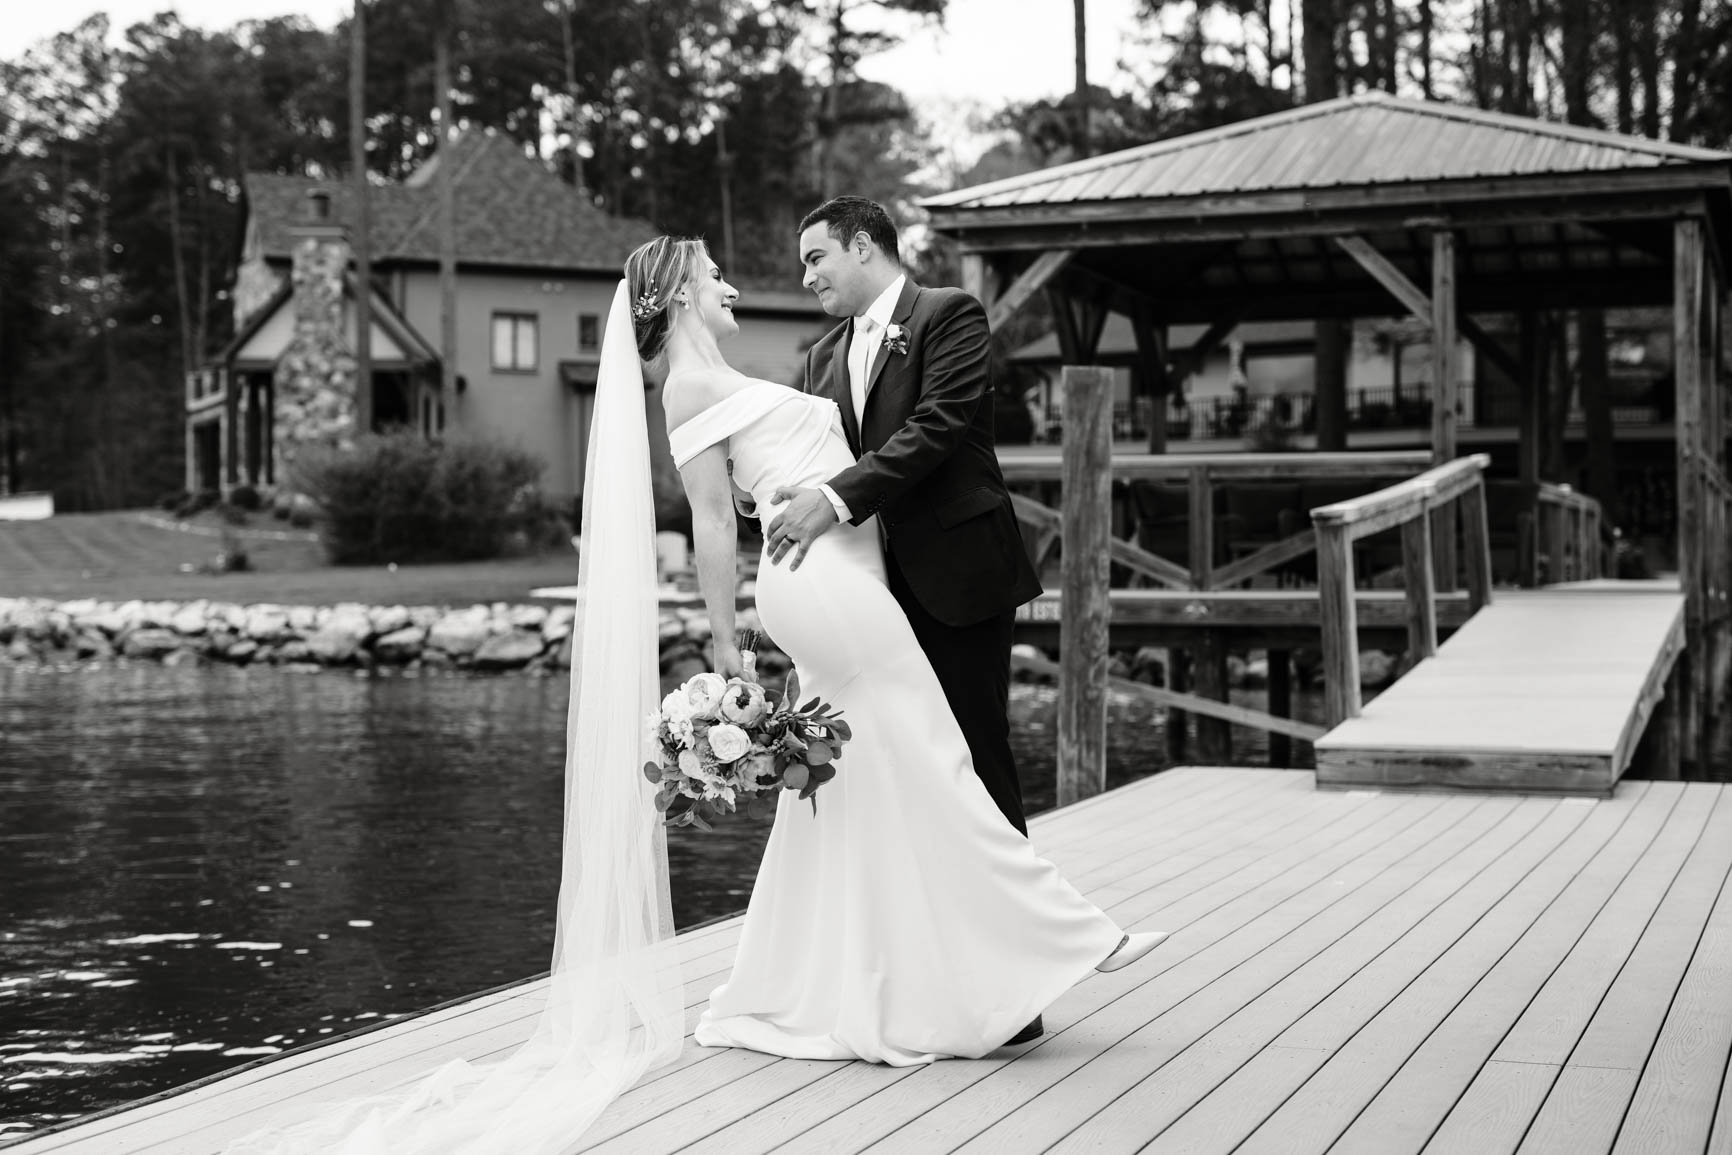 lake house elopement portraits session in Mooresville, NC shot by Nhieu Tang Photography | nhieutang.com